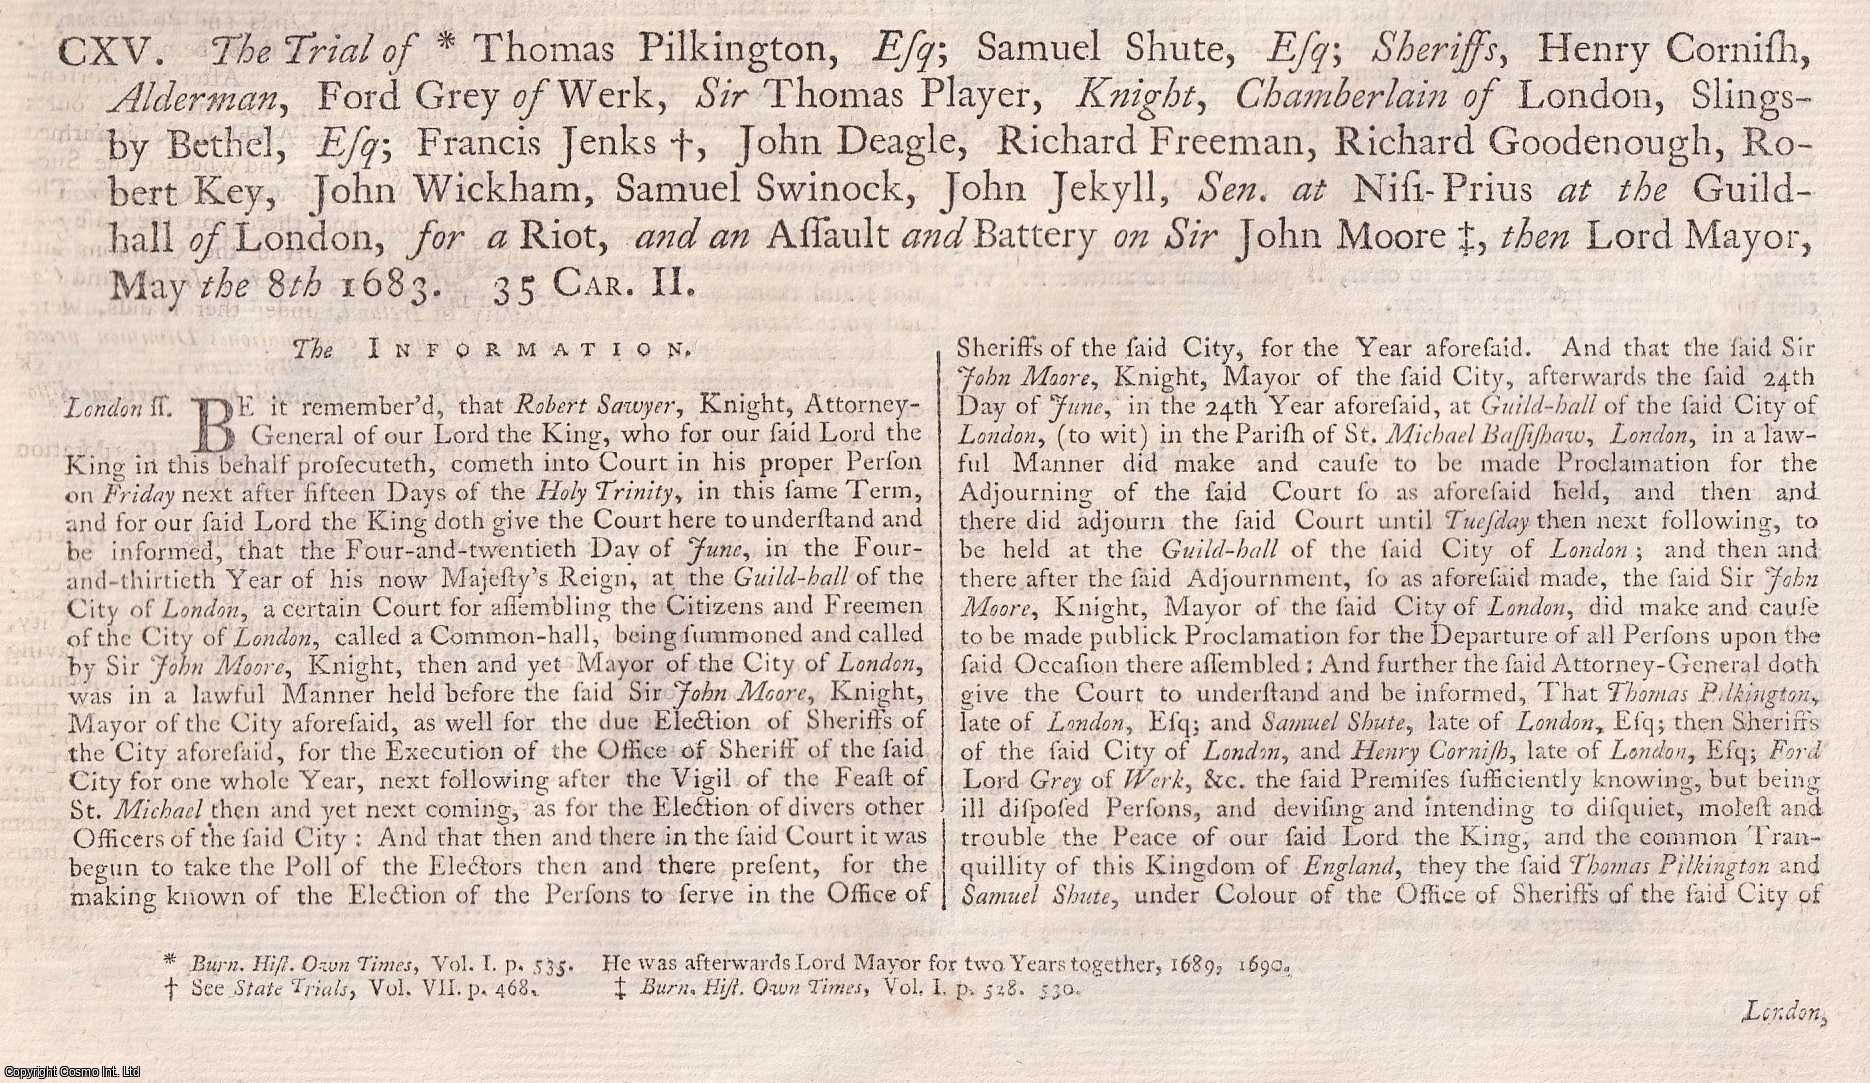 [Trial] - The Trial of Thomas Pilkington, and Samuel Shute Esqs., Sheriffs, Henry Cornish Alderman, Ford Lord Grey of Werk, and others, for a Riot, in continuing the Poll for Sherrifs, after the Common Hall was adjourned by Sir John More, the Lord Mayor, 8th May, 1683. An original article from the Collected State Trials.